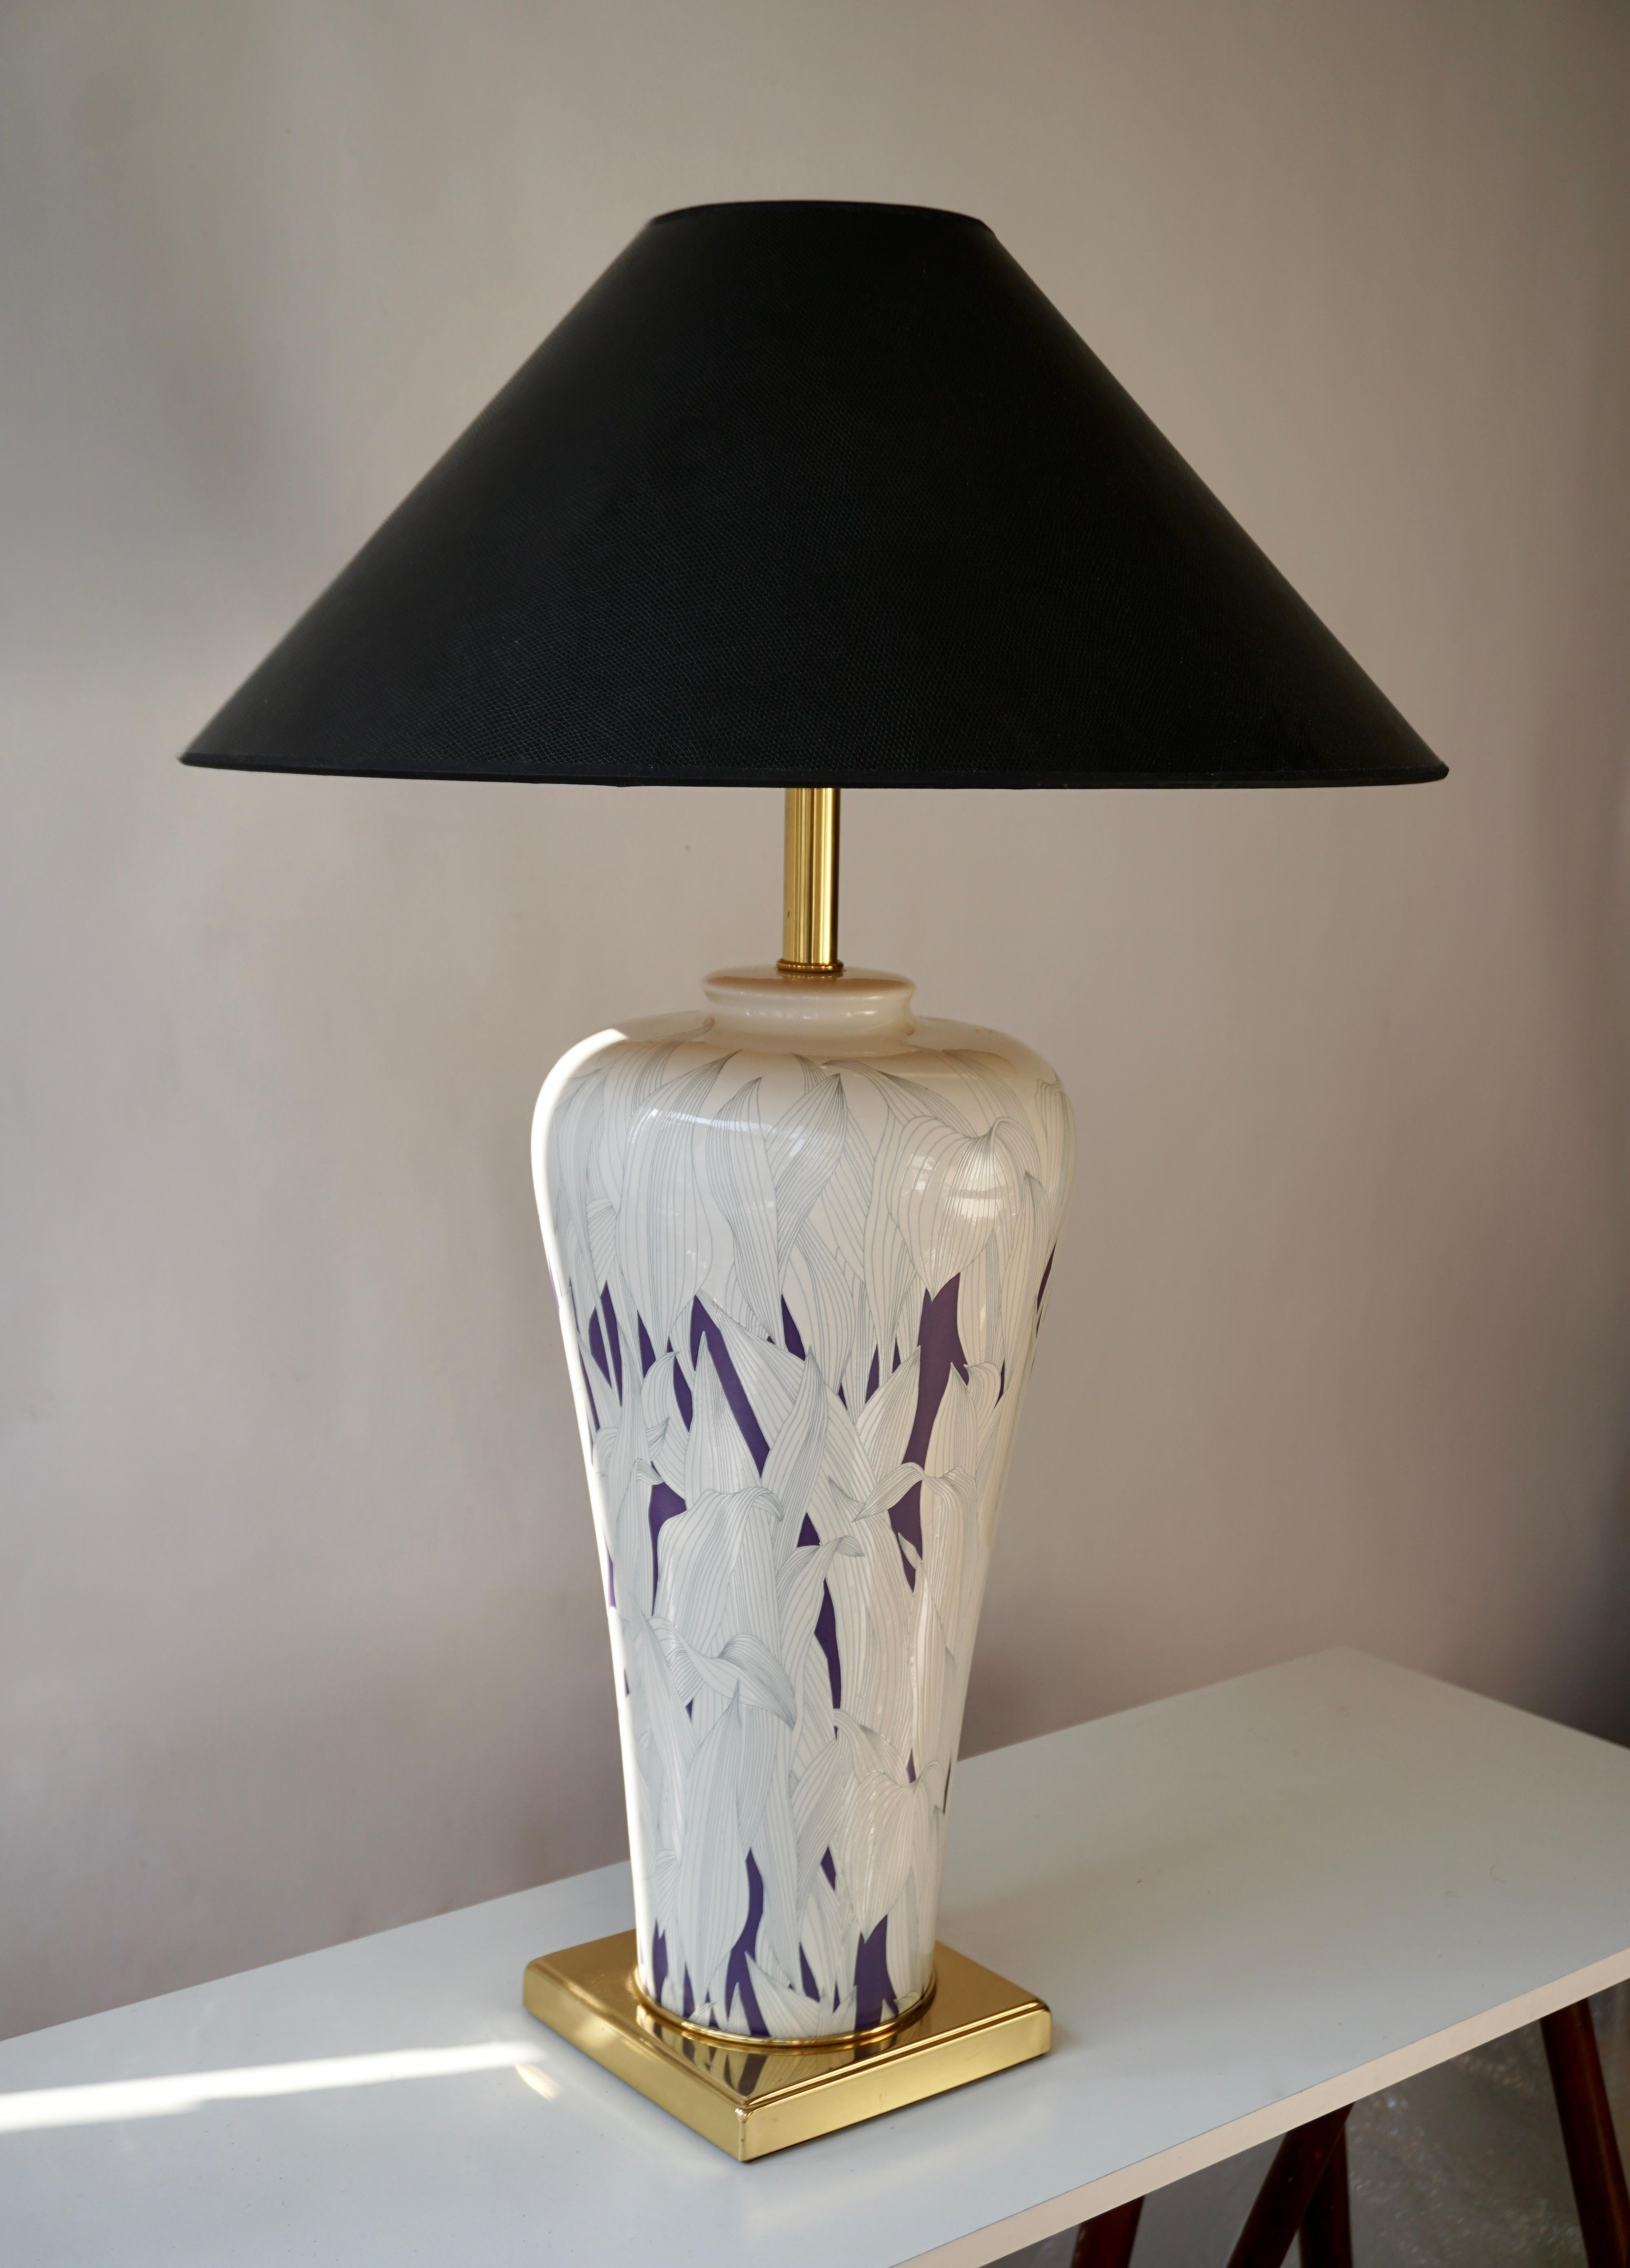 Large Italian purple and white ceramic and brass table lamp.
Measures: Height 51 cm.
Diameter 24 cm.
Weight 4 kg.

The lampshade is not included in the price.